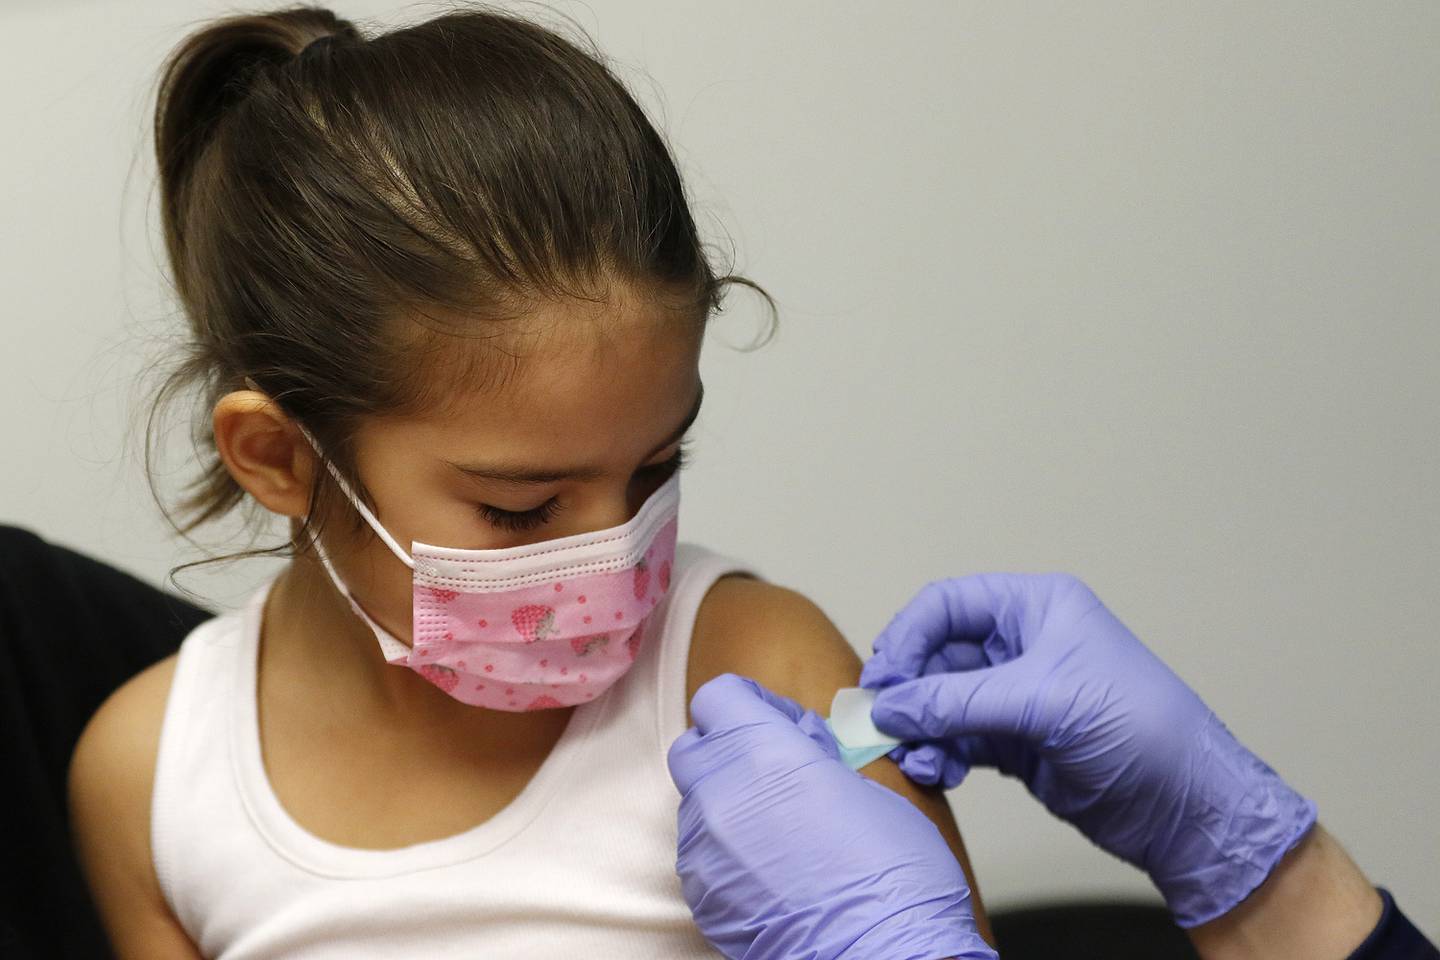 Eden Gomez, 5, of Carpentersville, watches as nurse Maggie Juarez applies a bandage over her first dose of the Pfizer vaccine on Friday, Dec. 3, 2021, at Advocate Children's Medical Group in Crystal Lake.  Children ages 5 to 11 are now eligible for COVID-19 vaccines.